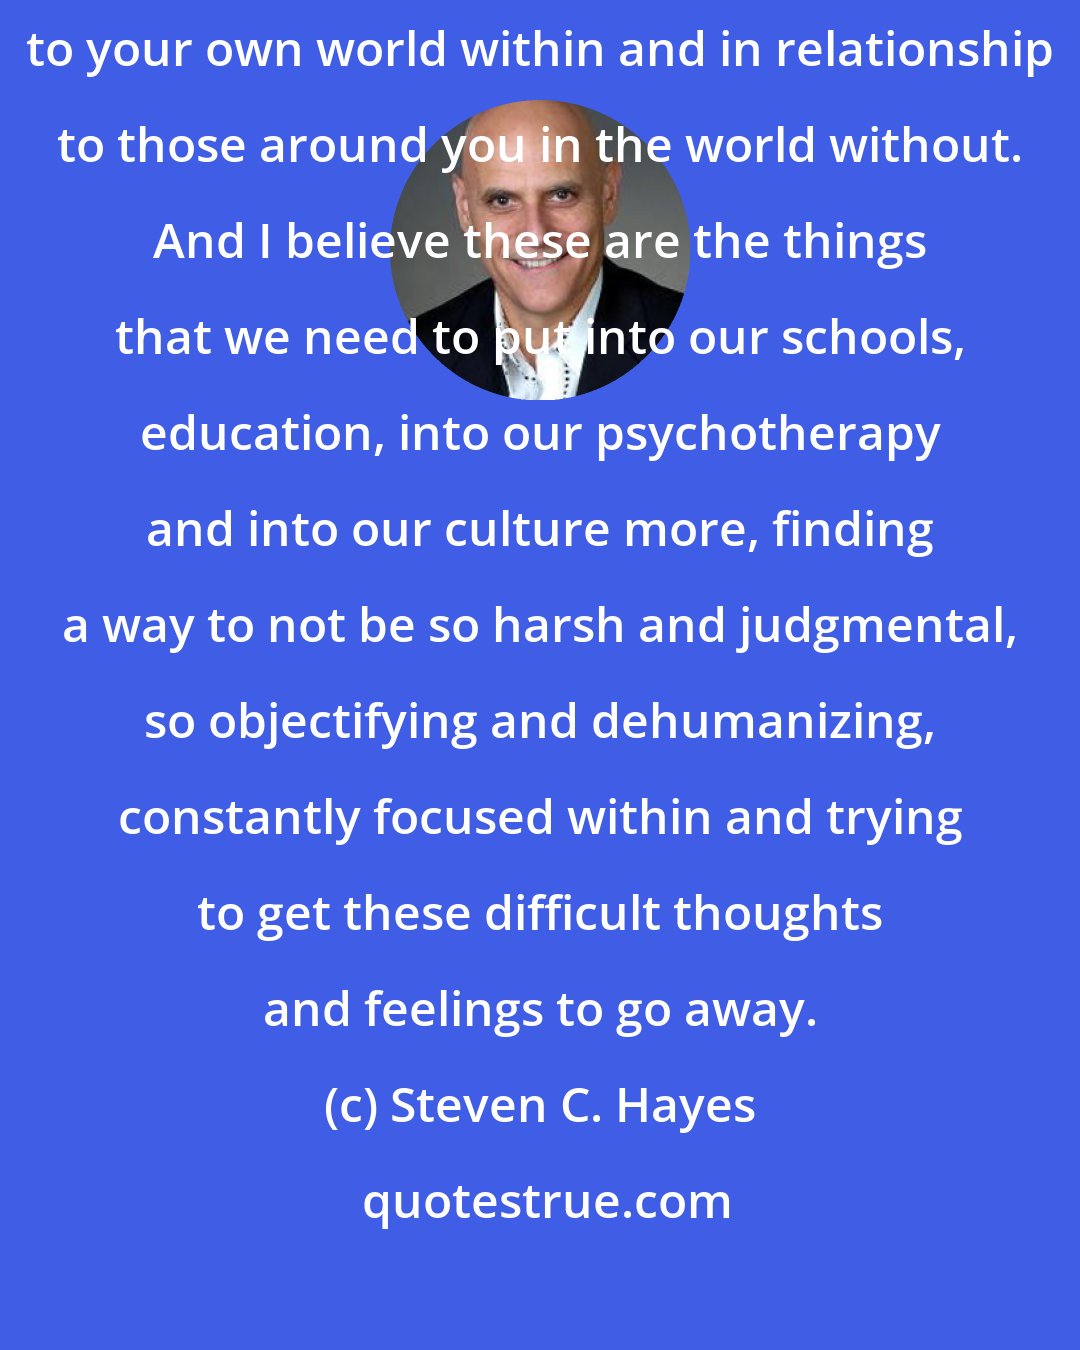 Steven C. Hayes: I think we're coming into a time where it has to do with how you stand in relationship to your own world within and in relationship to those around you in the world without. And I believe these are the things that we need to put into our schools, education, into our psychotherapy and into our culture more, finding a way to not be so harsh and judgmental, so objectifying and dehumanizing, constantly focused within and trying to get these difficult thoughts and feelings to go away.